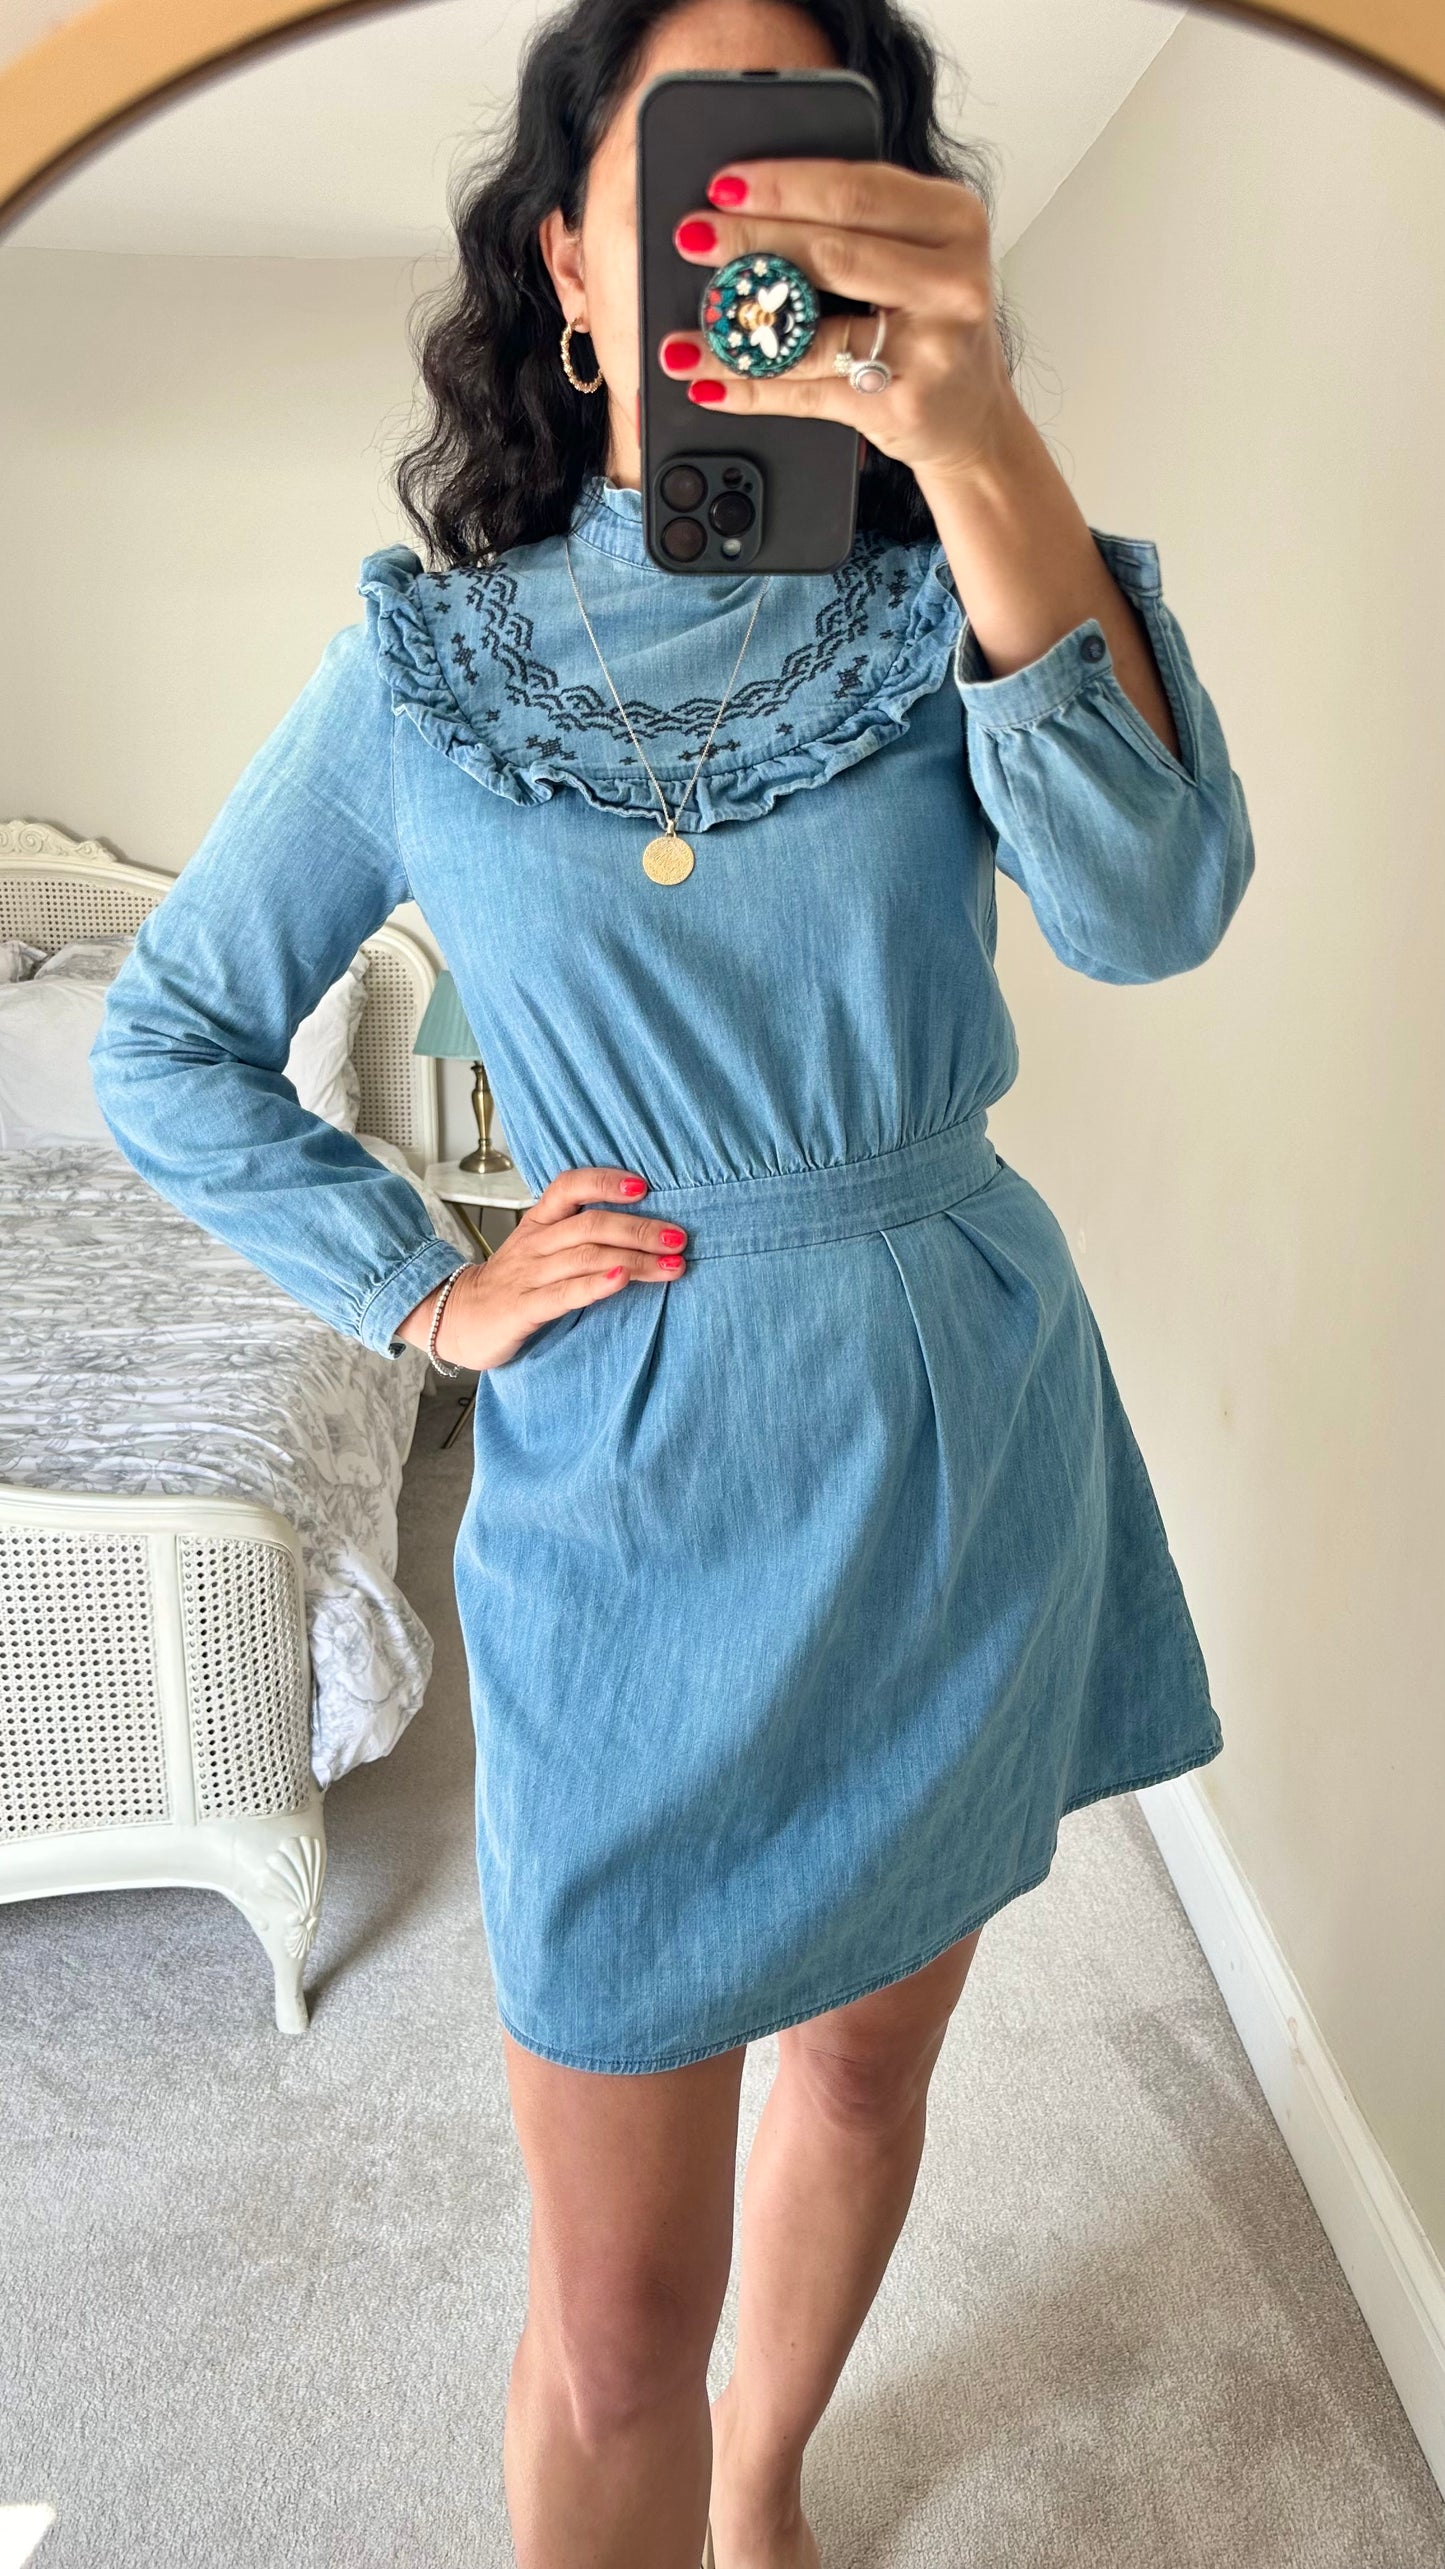 & other stories denim blue jeans dress small UK 6-8 extra small casual wear vgc